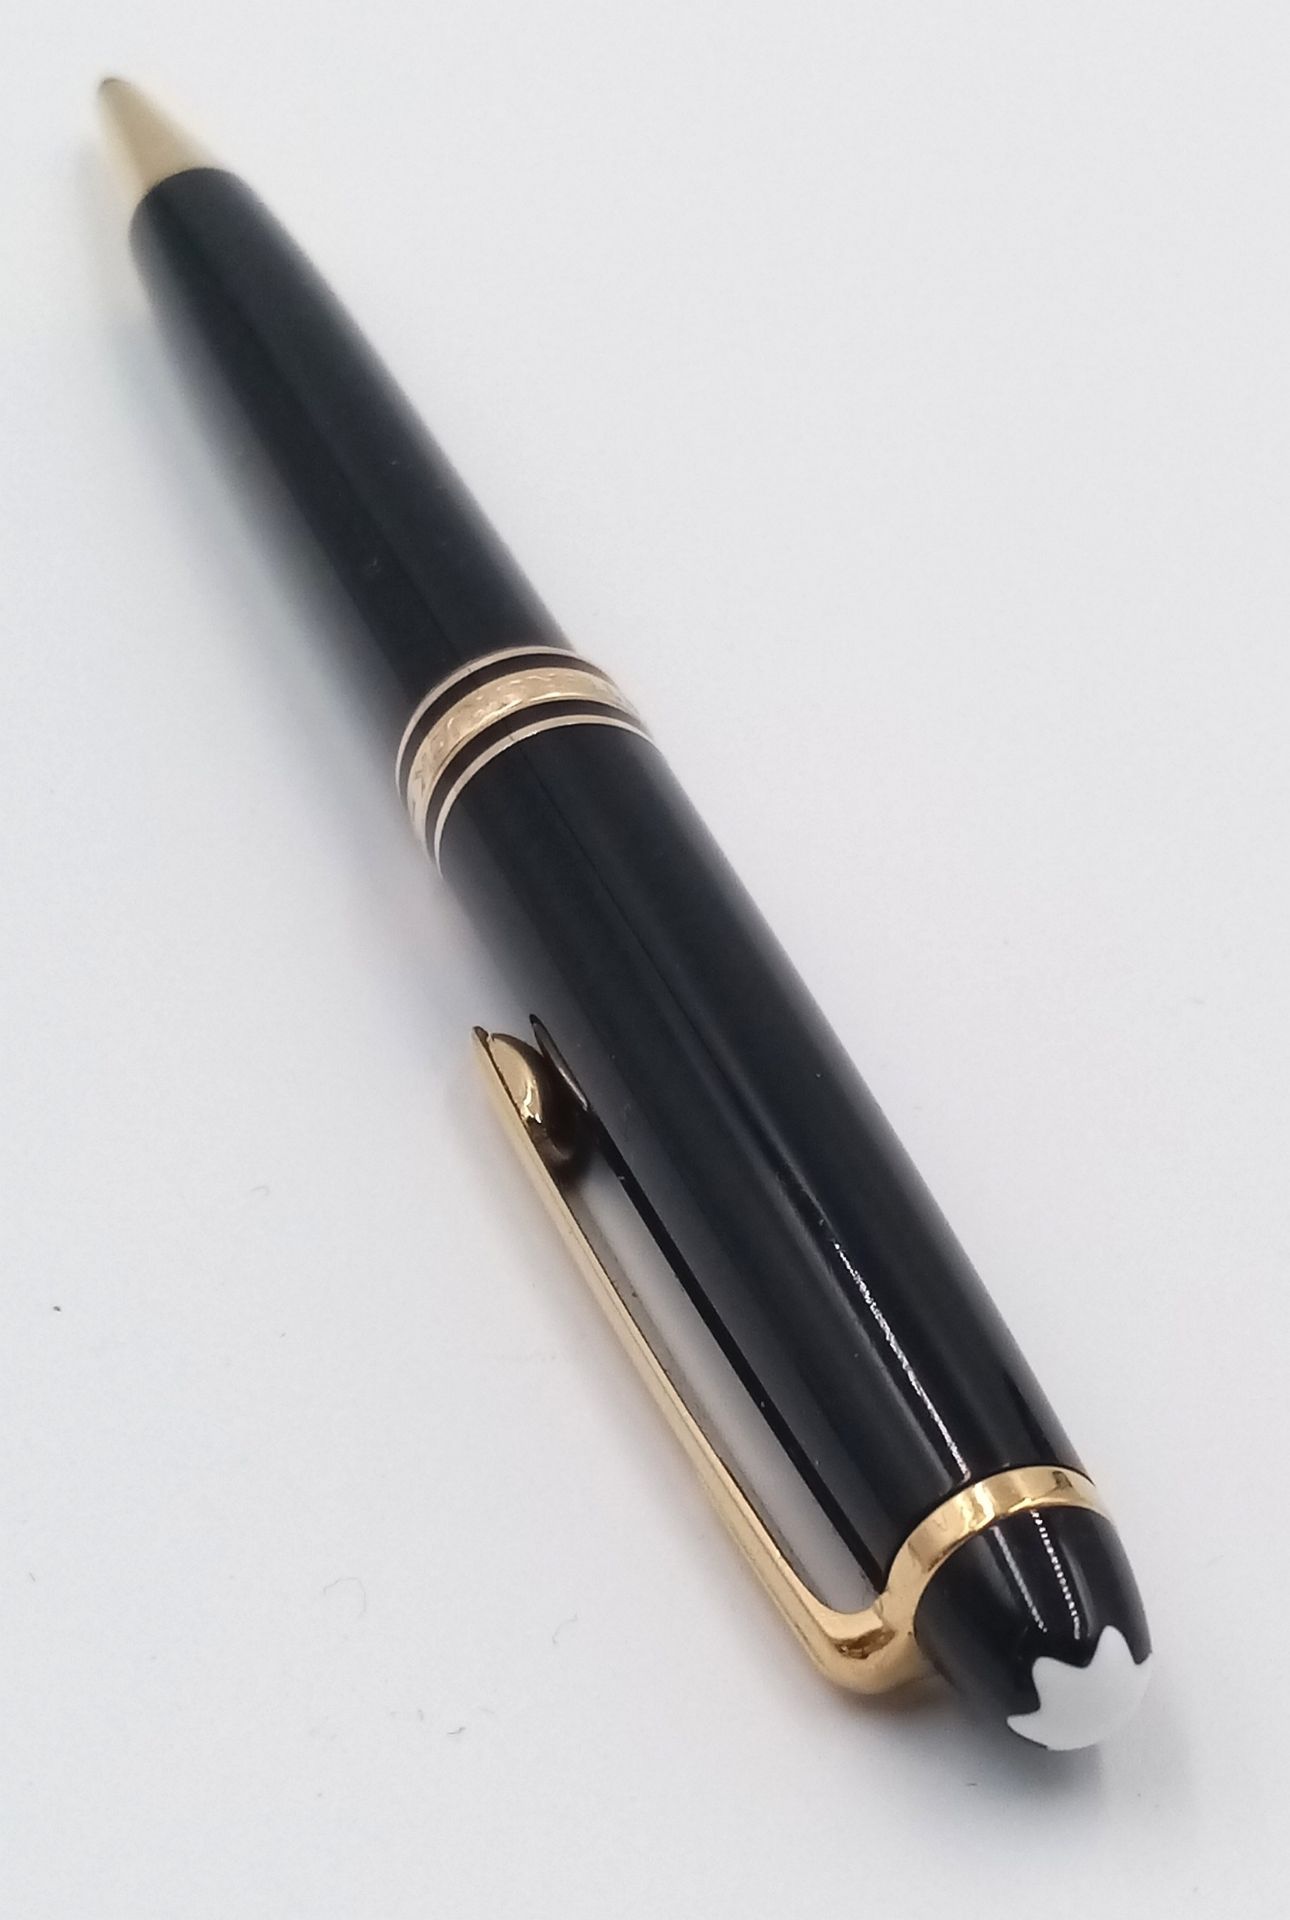 A MONT BLANC ROLLERBALL PEN - BLACK AND GOLD FINISH. - Bild 2 aus 4